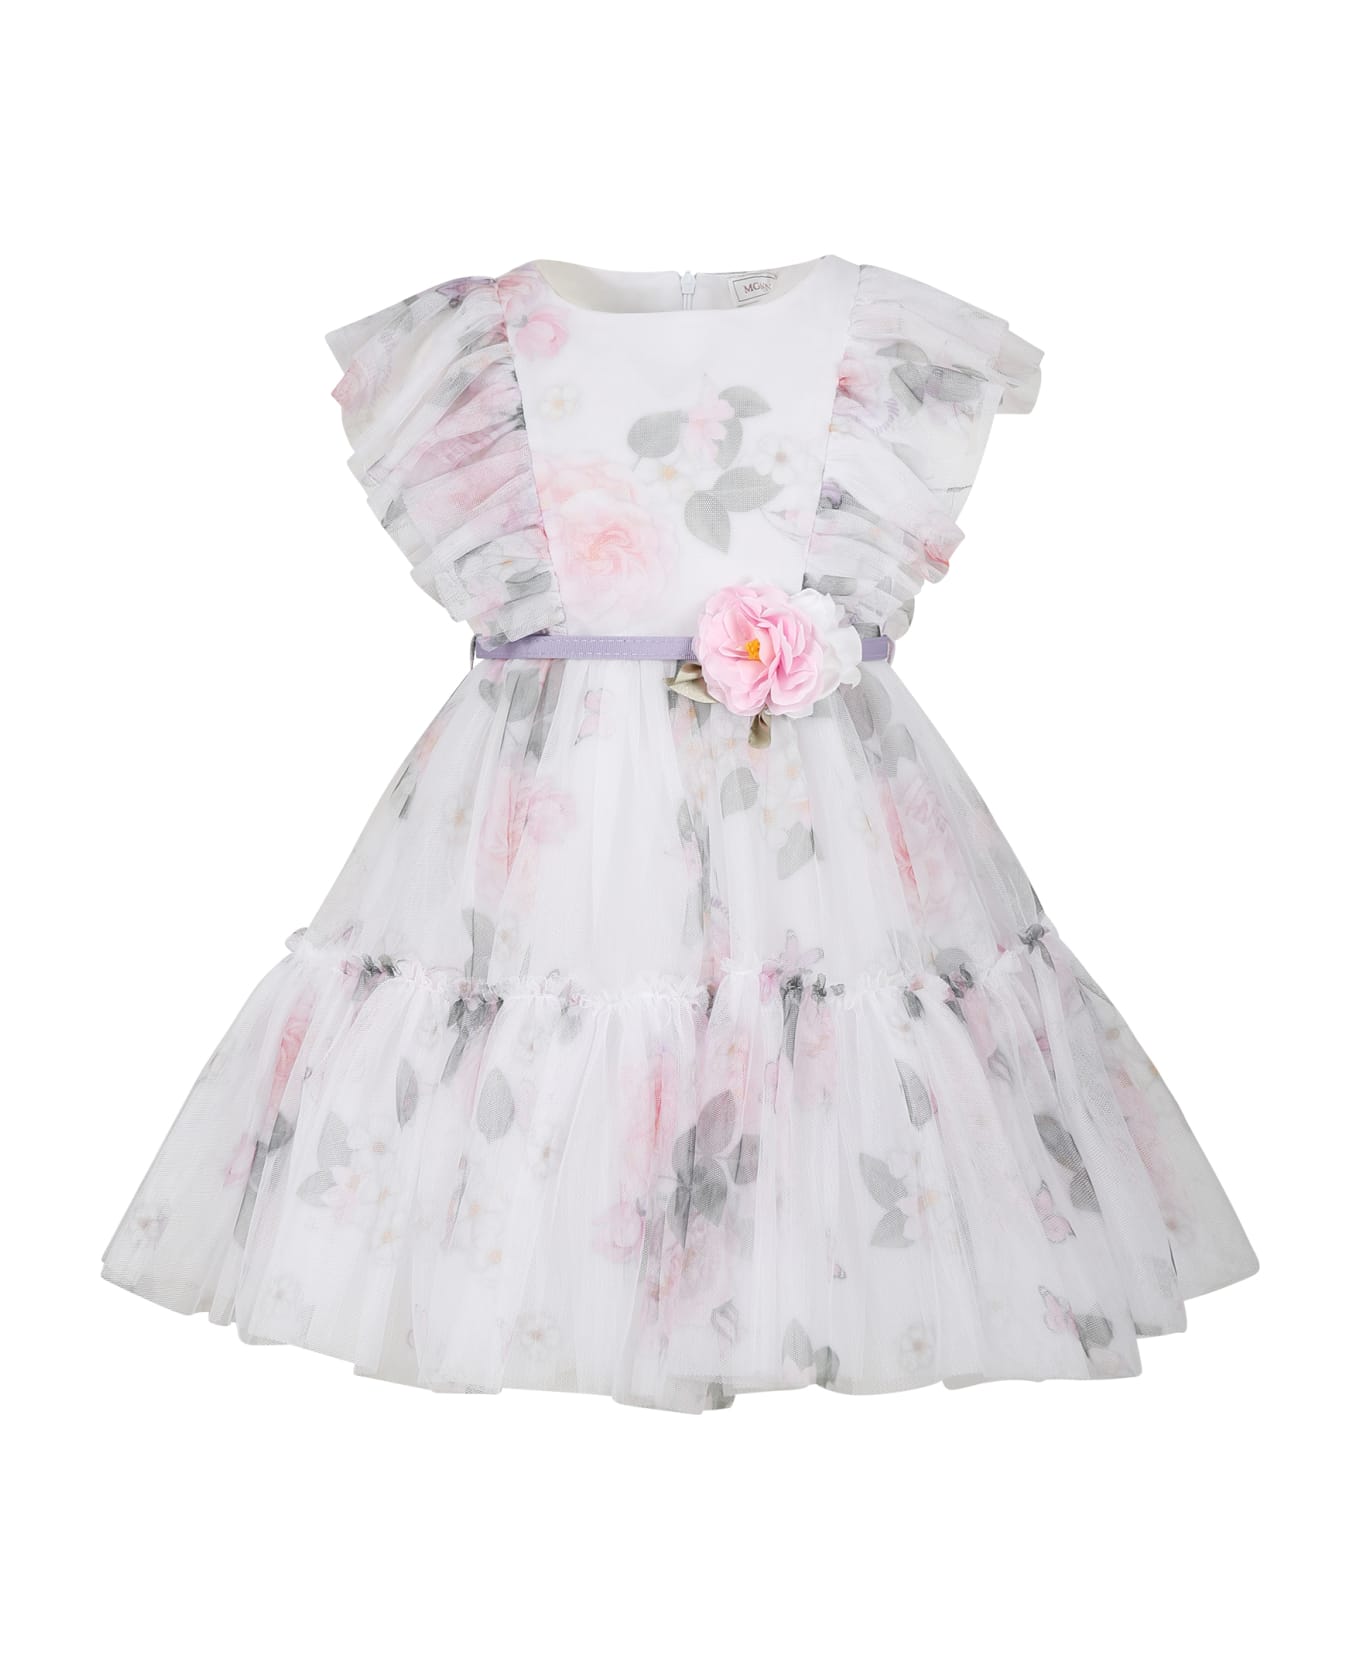 Monnalisa White Dress For Girl With Floral Print - White